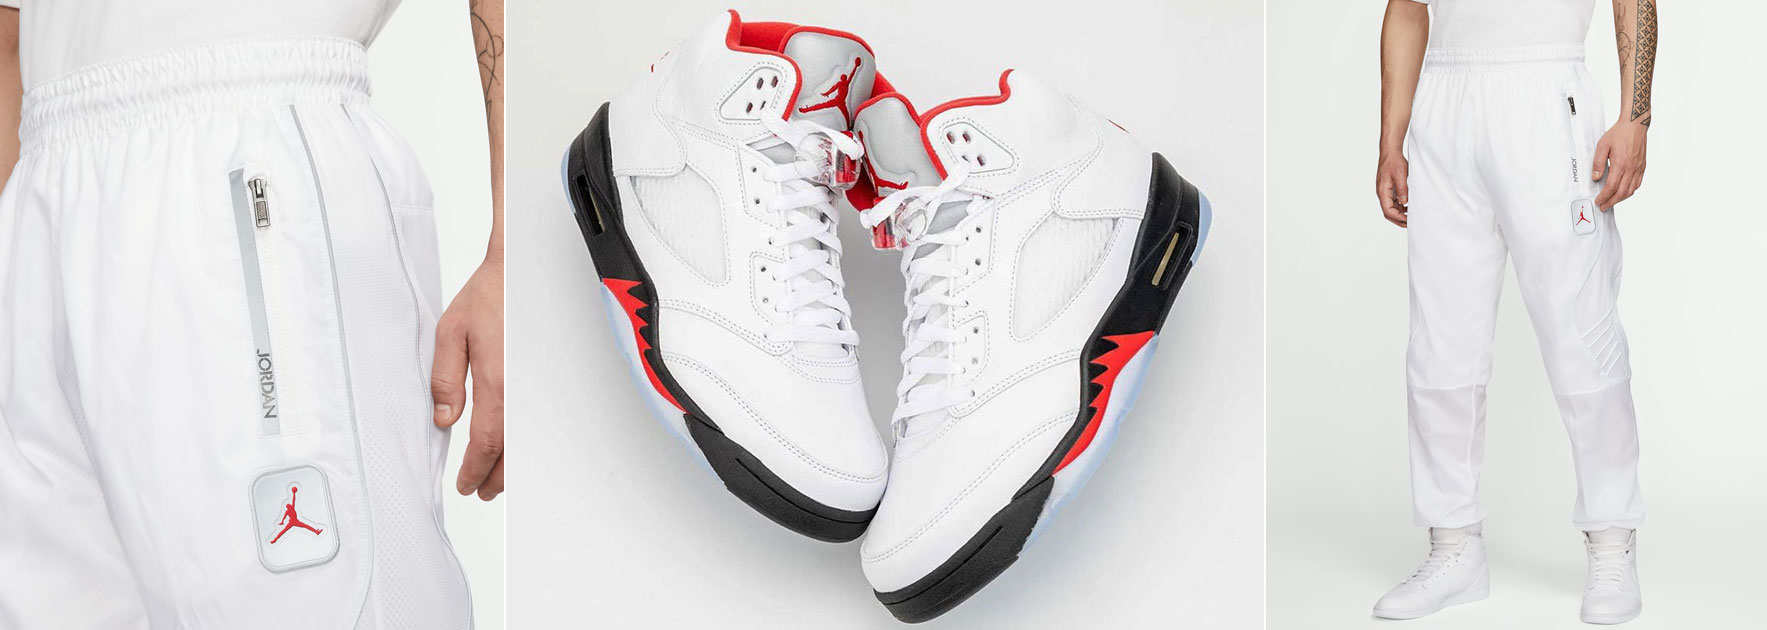 fire red jordan 5 outfit